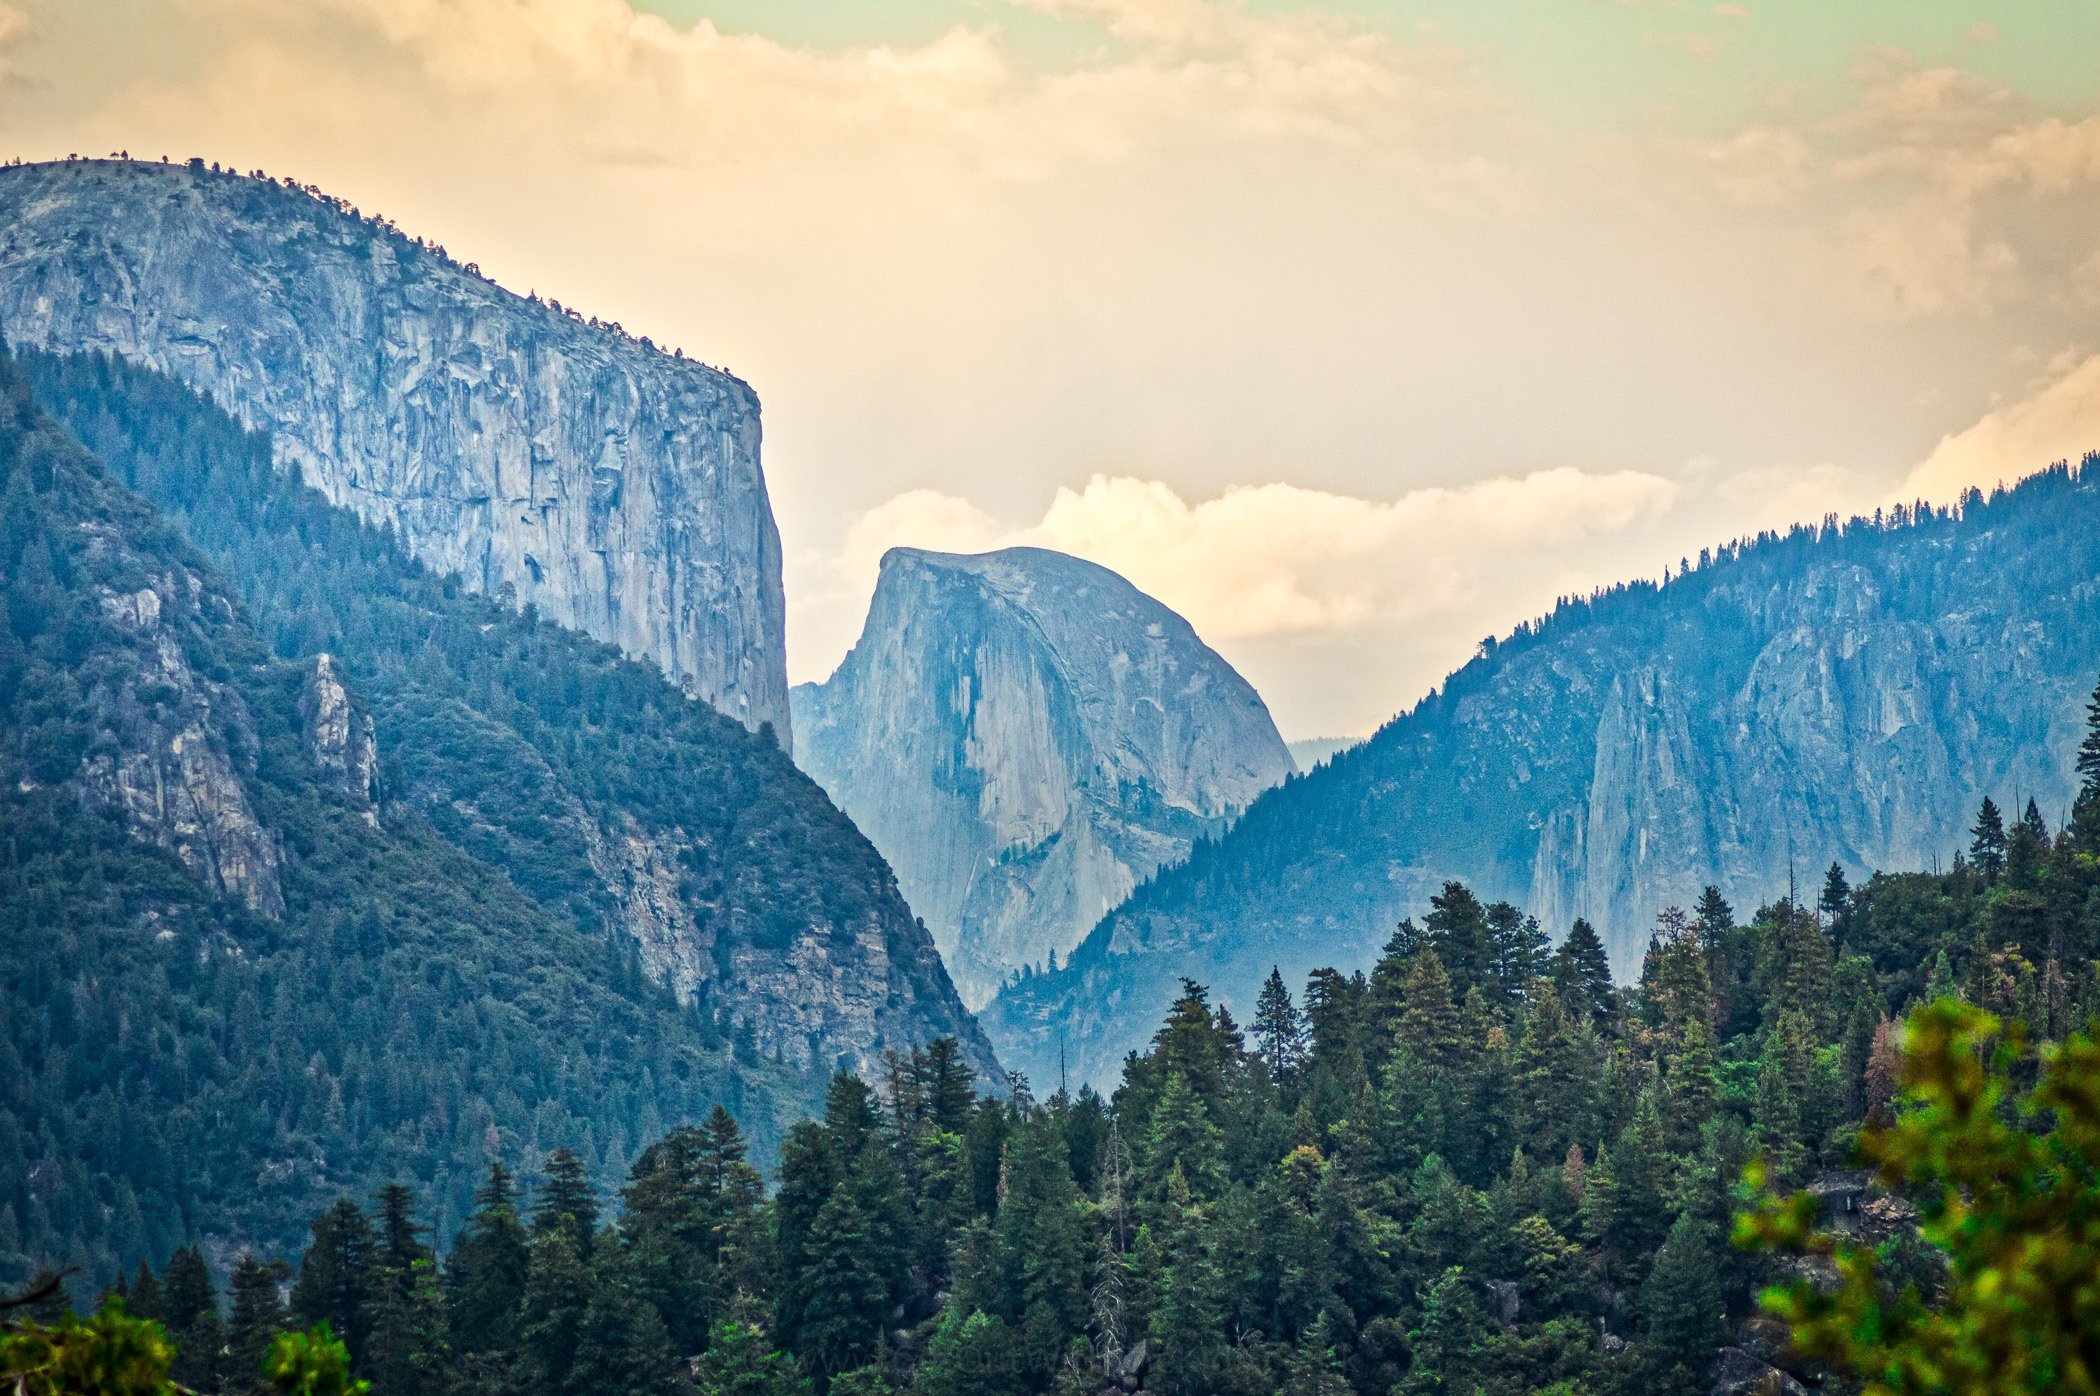 The classic view of half dome